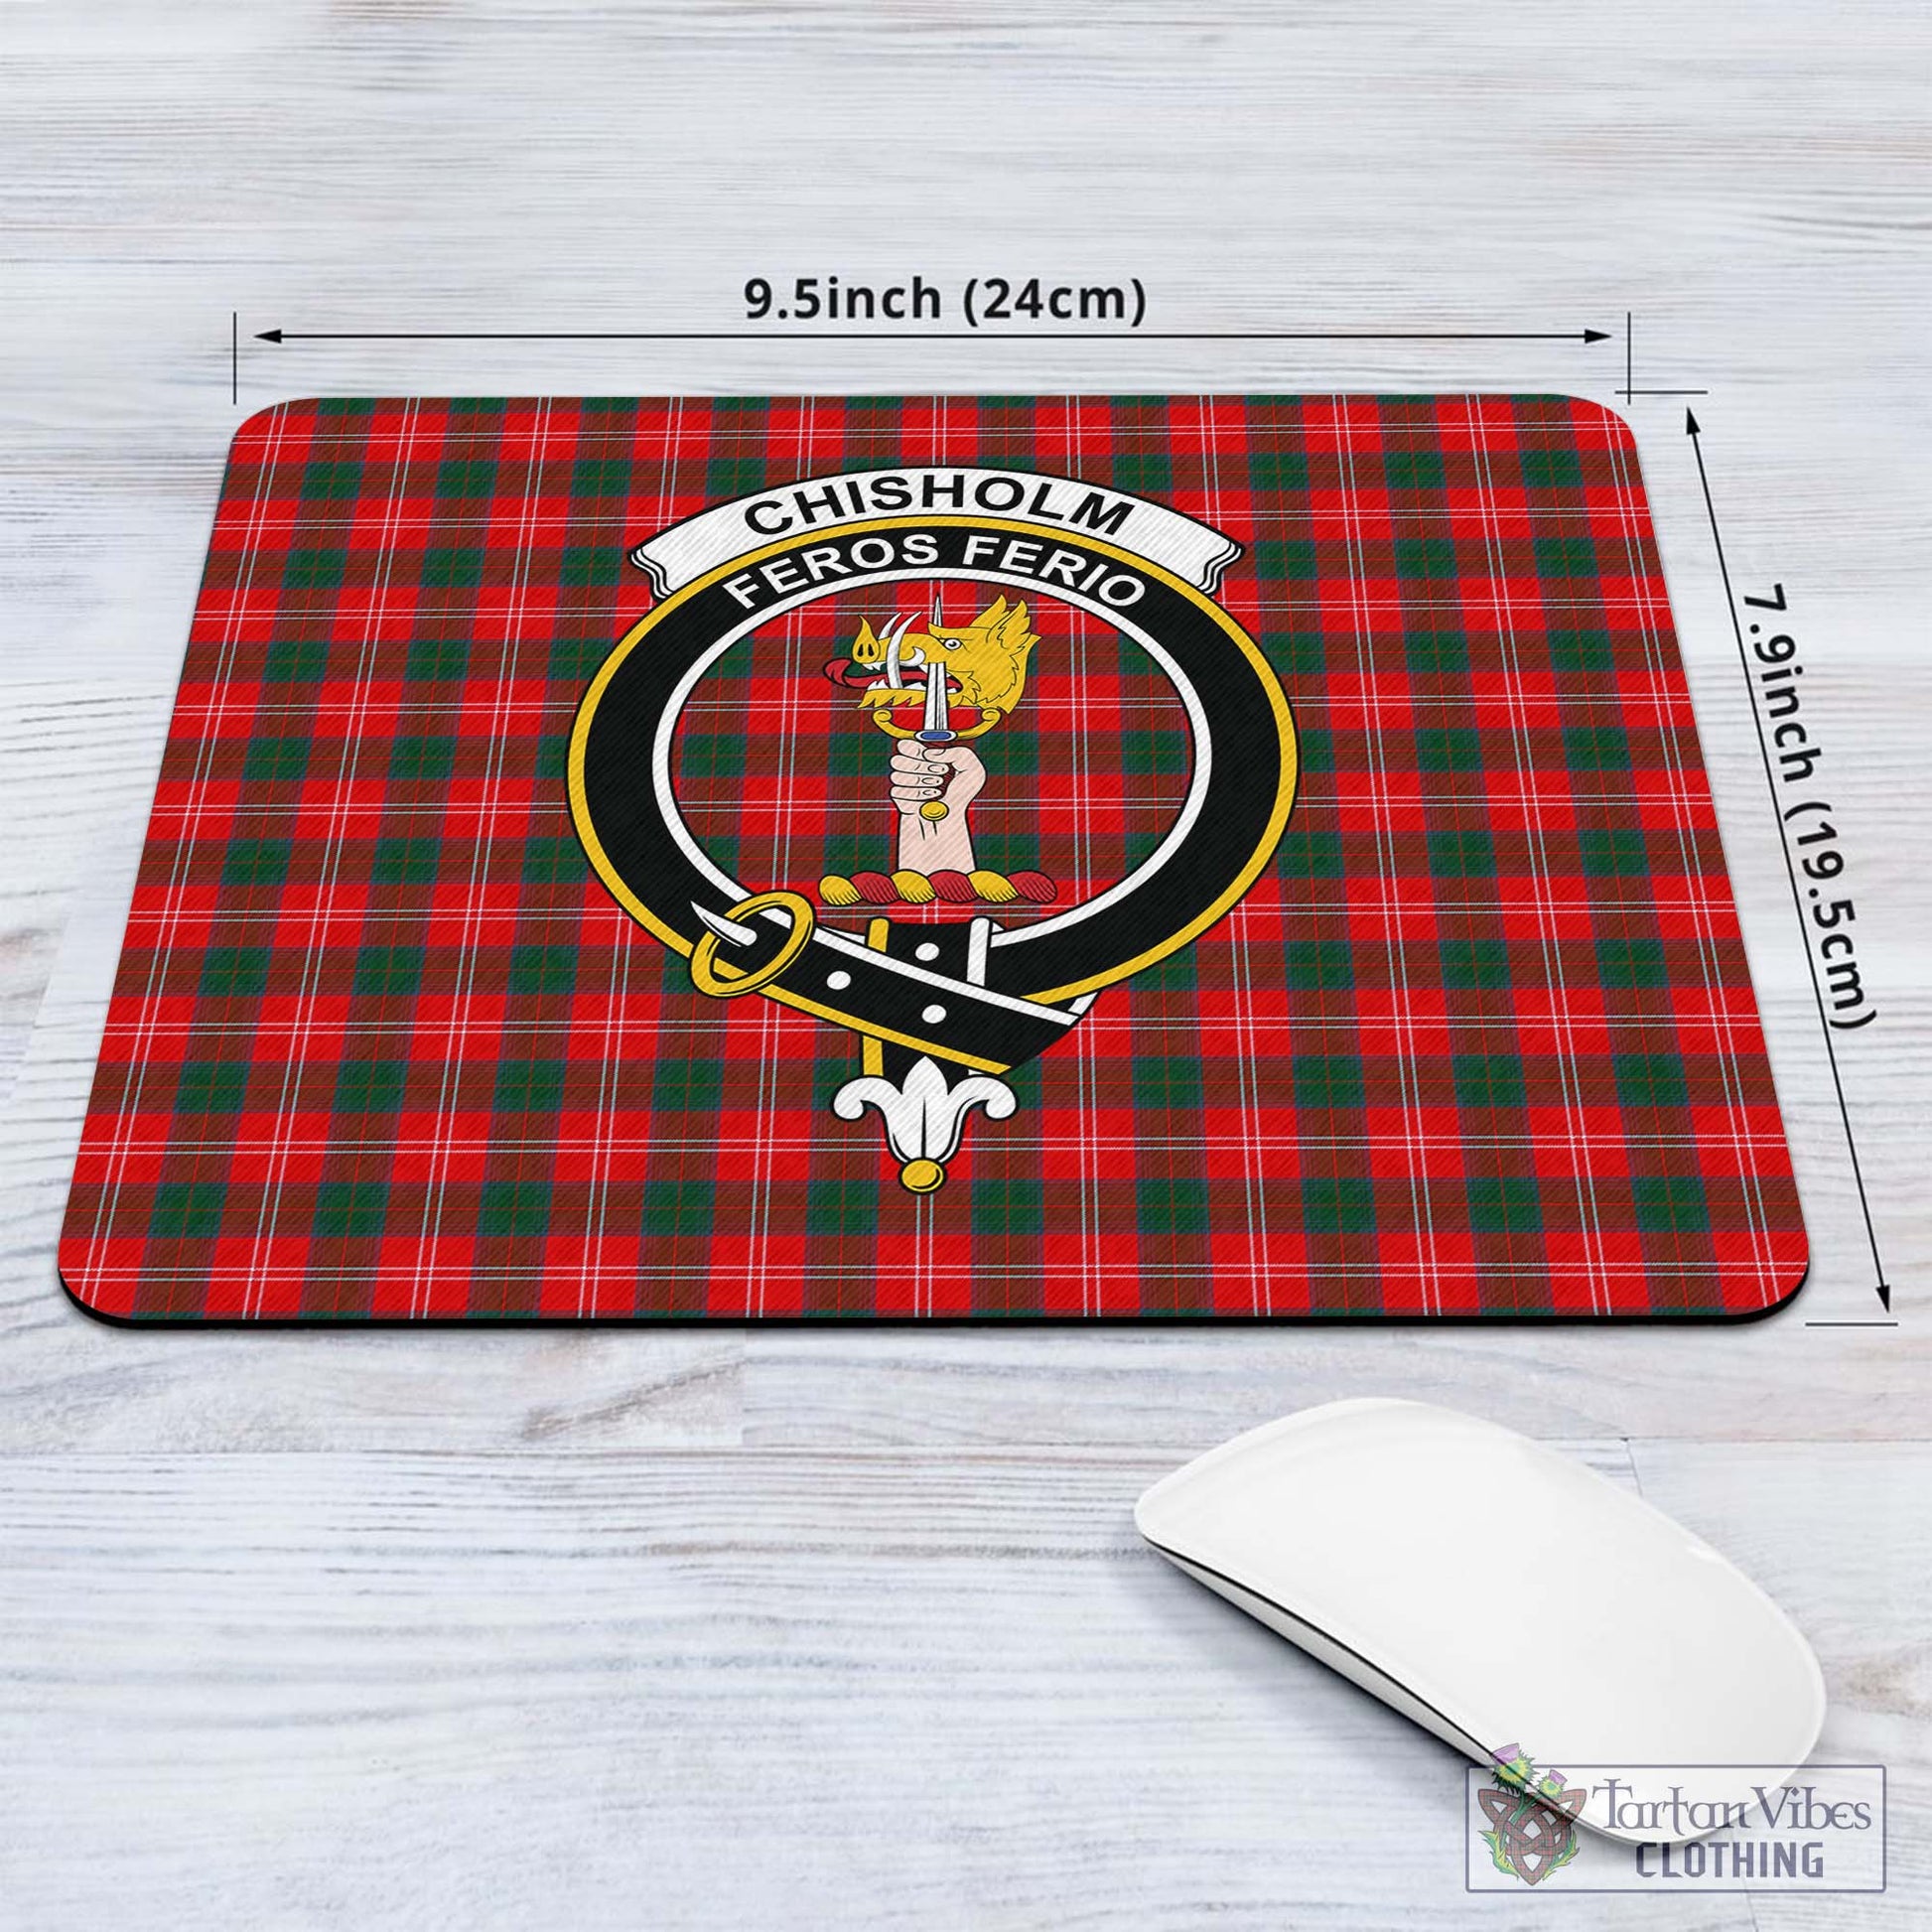 Tartan Vibes Clothing Chisholm Modern Tartan Mouse Pad with Family Crest